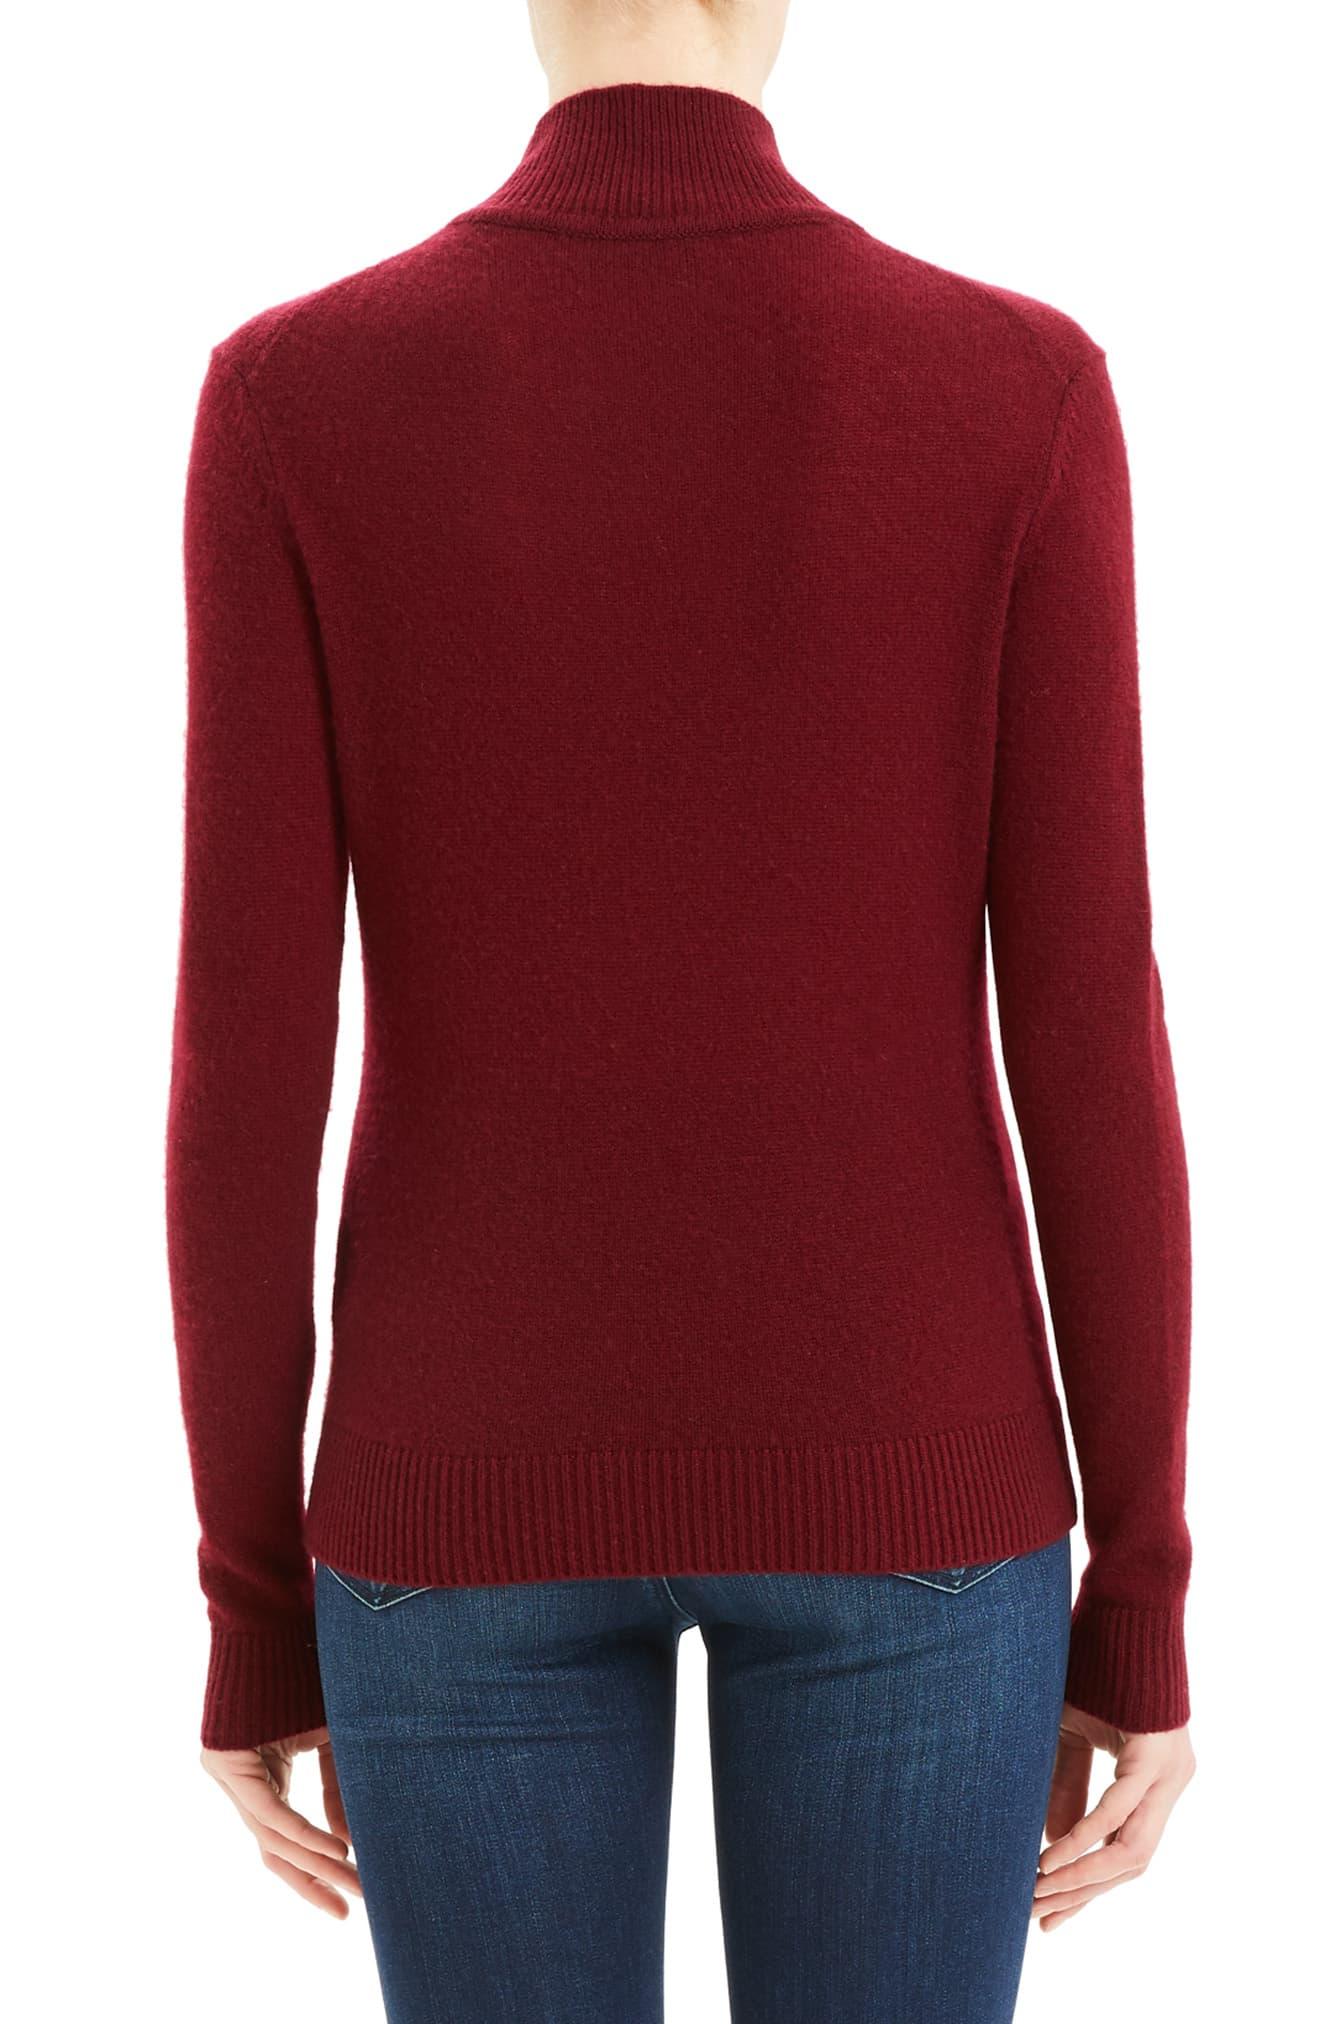 Theory Turtleneck Cashmere Sweater in Deep Cherry (Red) - Lyst